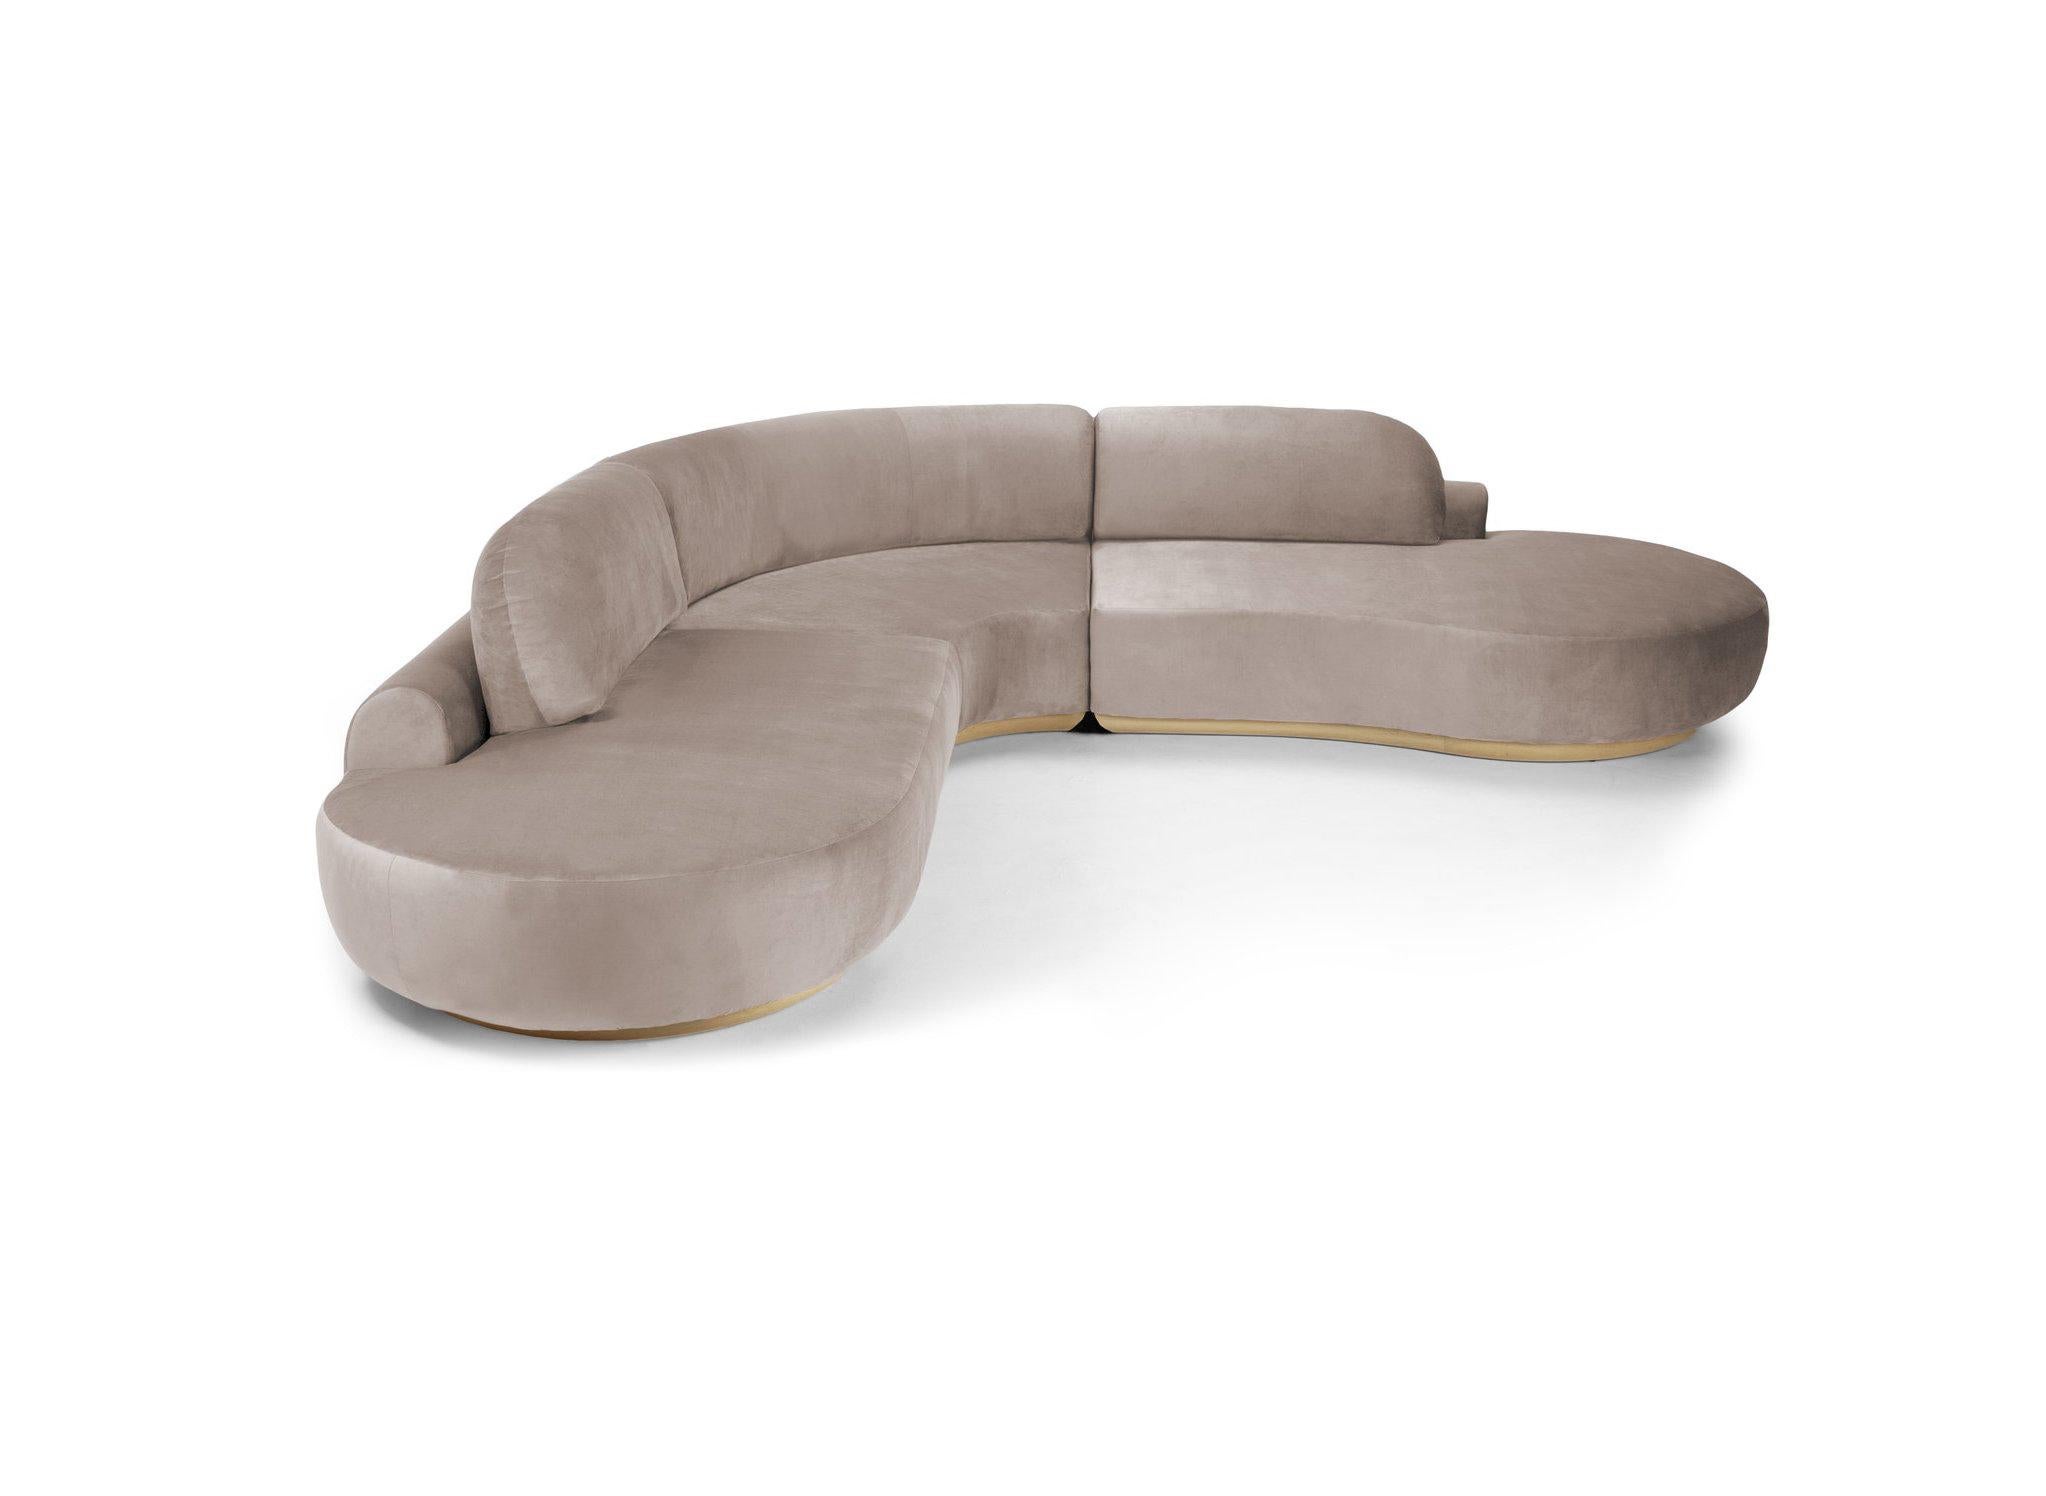 Naked Curved Sectional Sofa, 3 Piece with Natural Oak and Paris Mouse For Sale